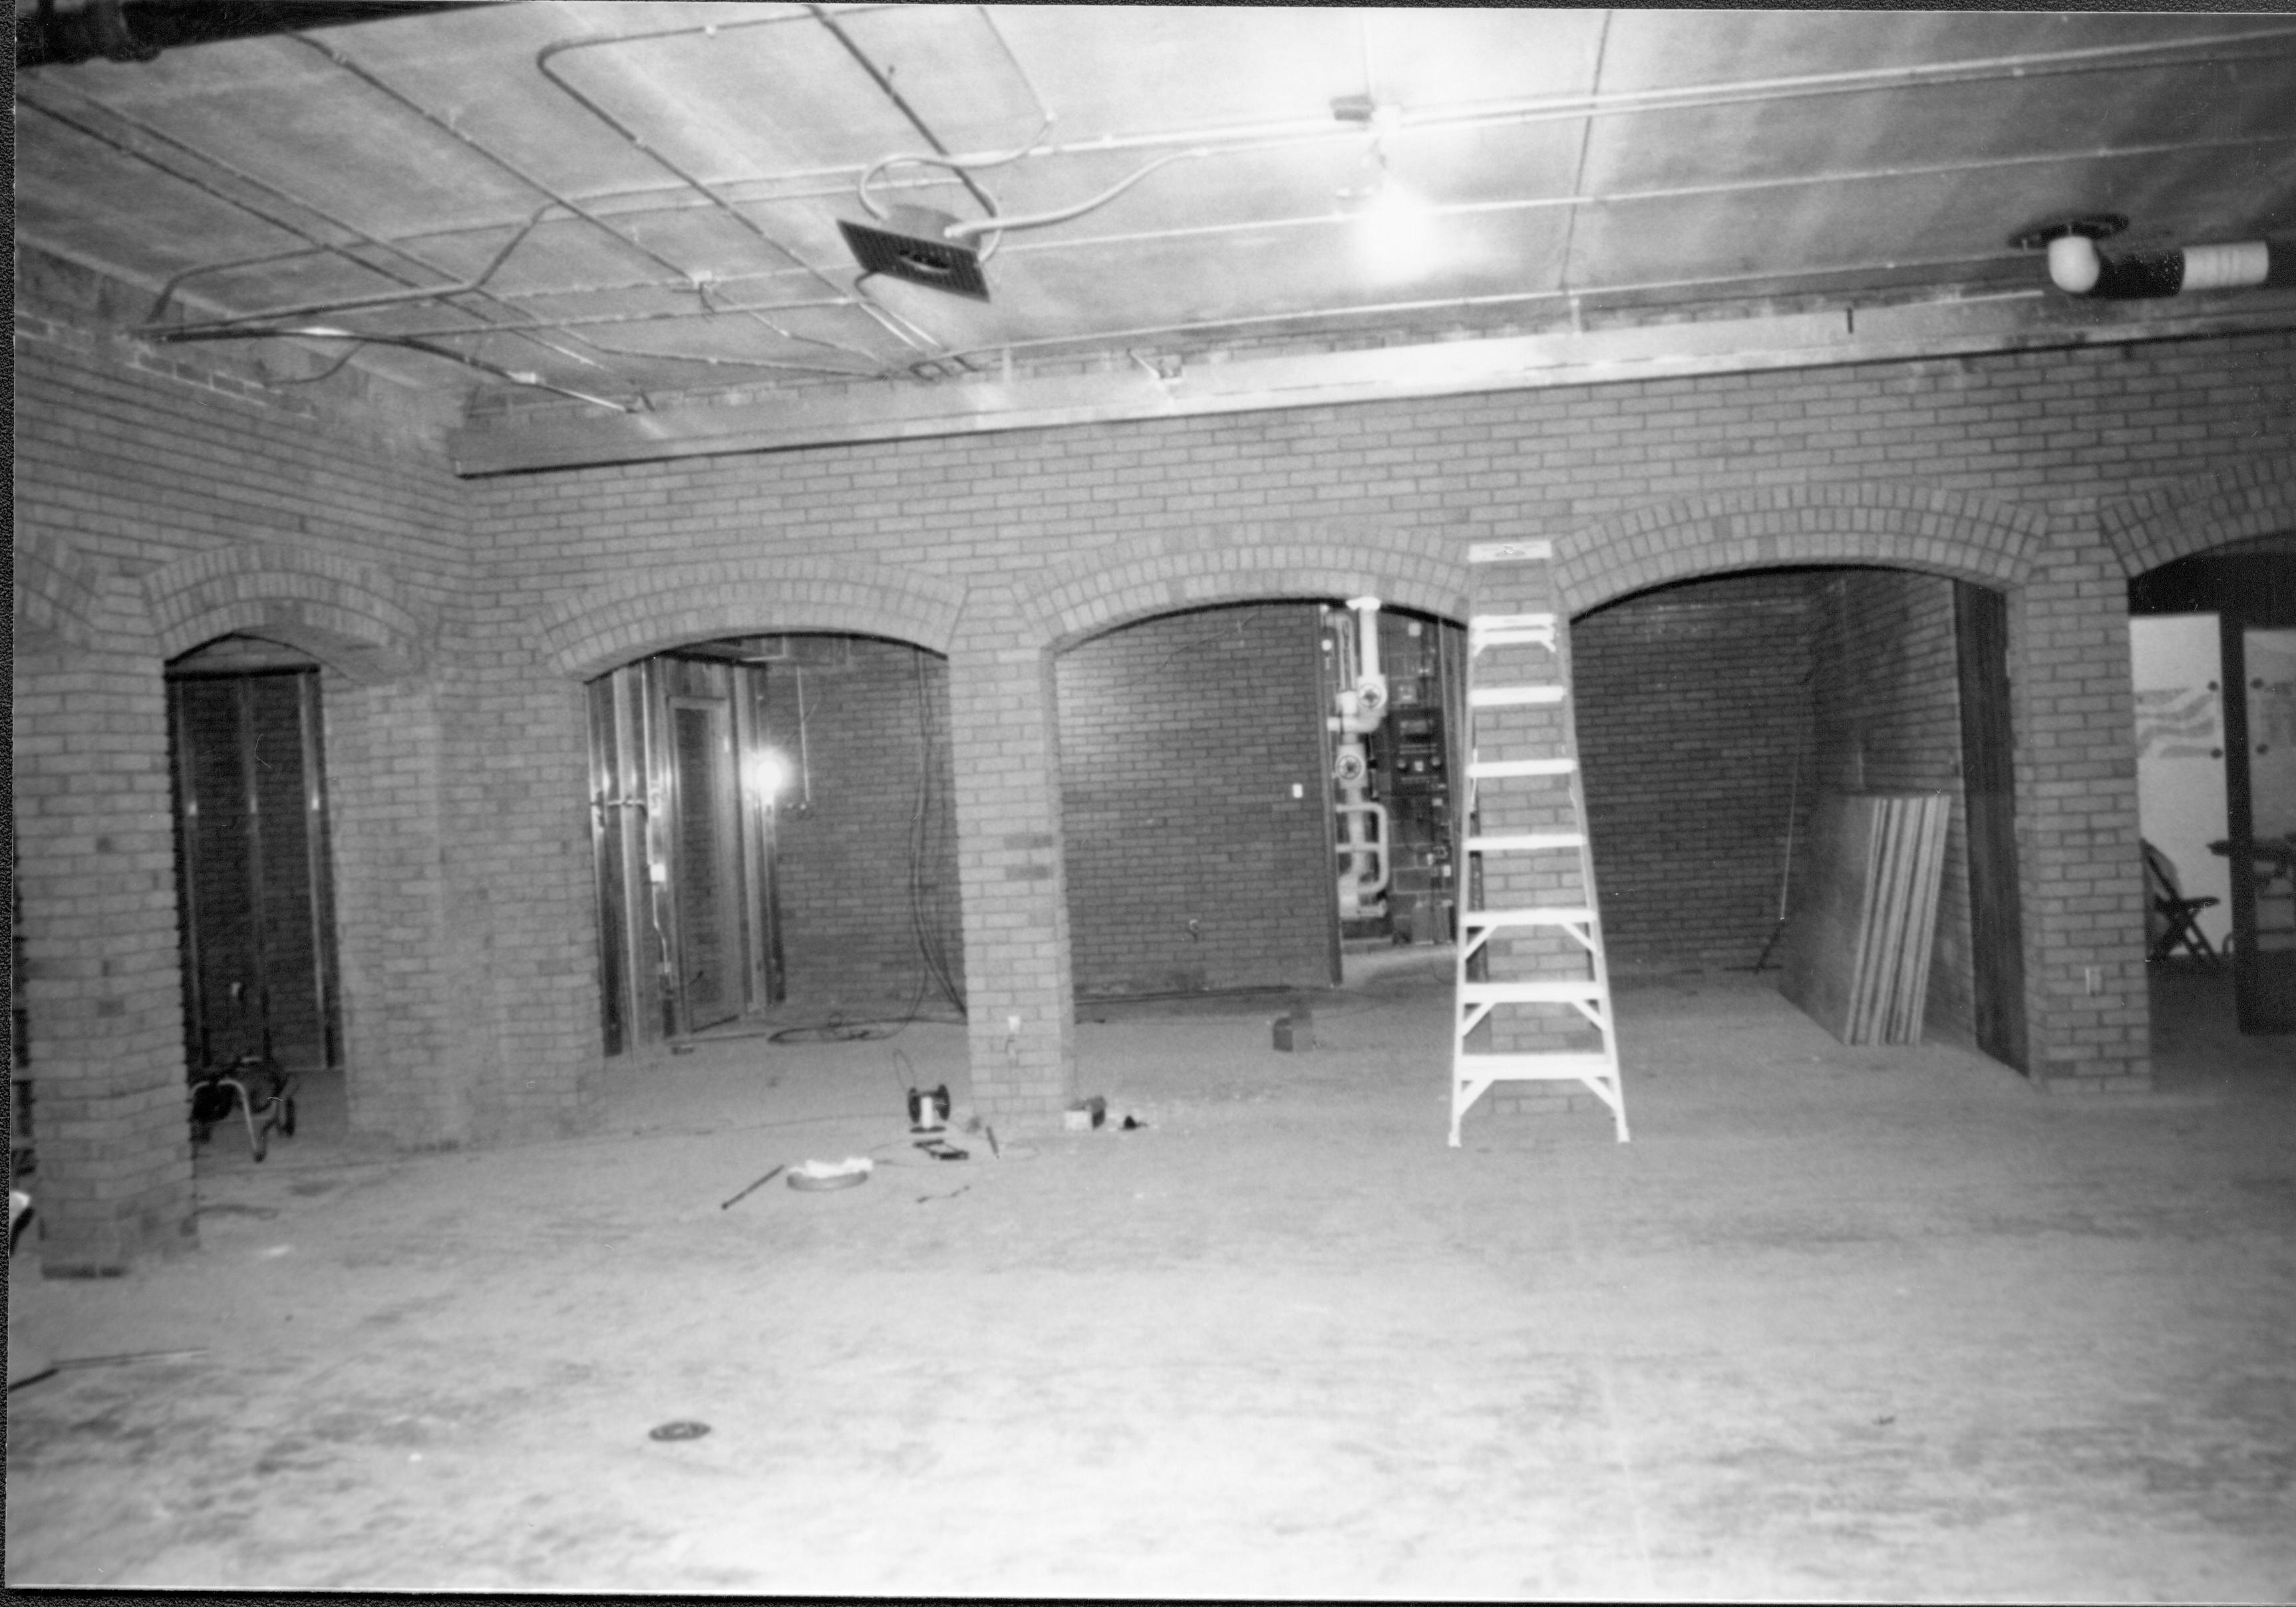 Visitor Center - remodeling, main area with bookstore area in background. Restroom arches on left.  Bookstore storage area visible on center left. Open door to boiler room in background center behind ladder. Office area visible through open door on right. Looking East from main area Visitor Center, remodeling, bookstore, boiler room, office, main, restroom, storage